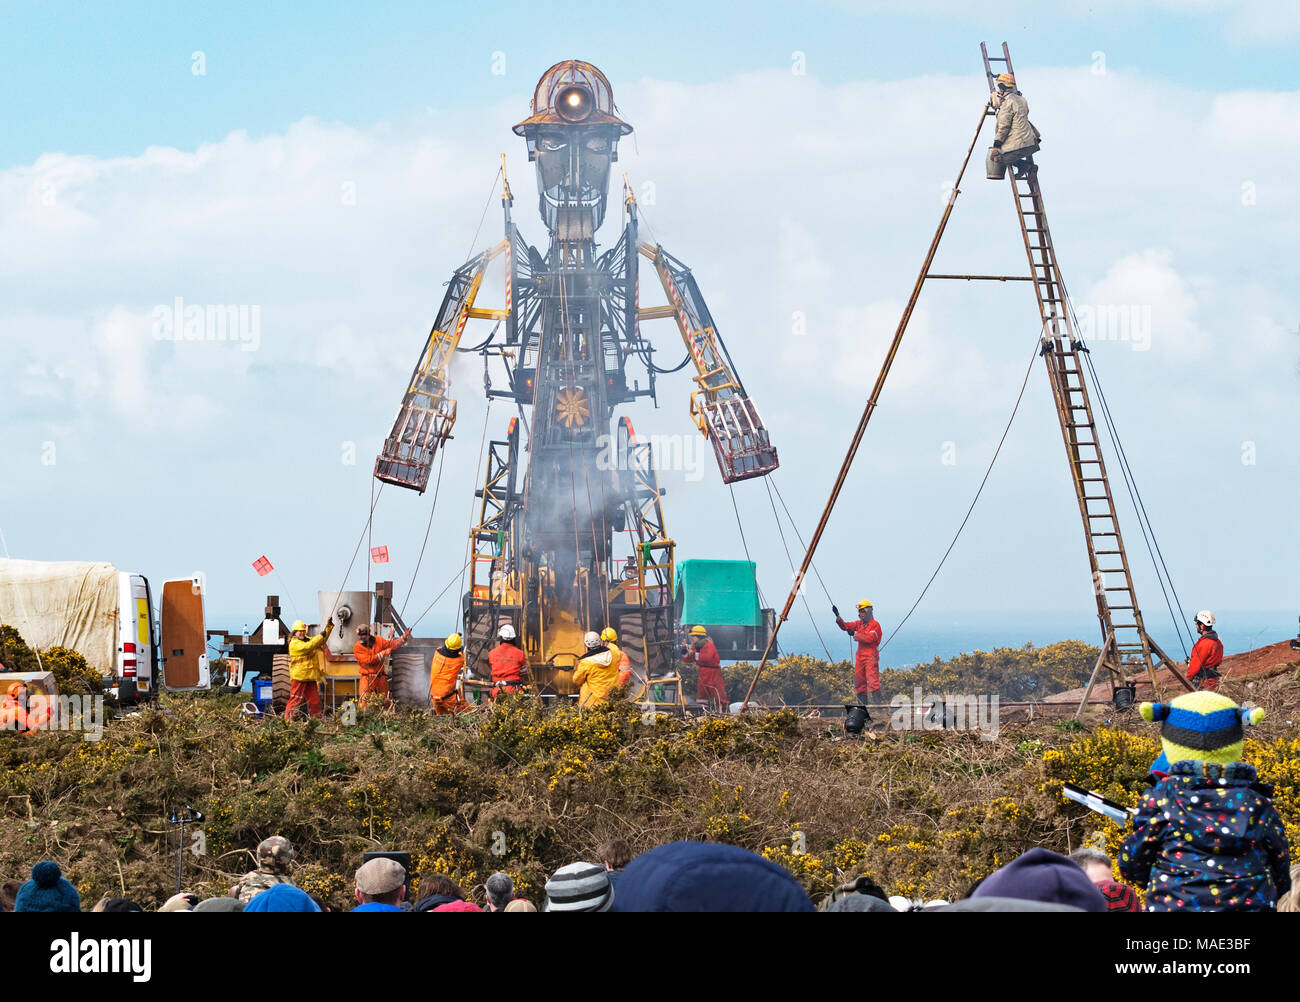 Pendeen, Cornwall, UK. 31st March 2018. The “ Man Engine” at 11.2mt is the largest mechanical puppet ever constructed in Britain, he first appeared in 2016 to mark the 10th anniversary of Cornwall and West Devon Mining landscape being given World Heritage Status. Credit: Kevin Britland/Alamy Live News Stock Photo